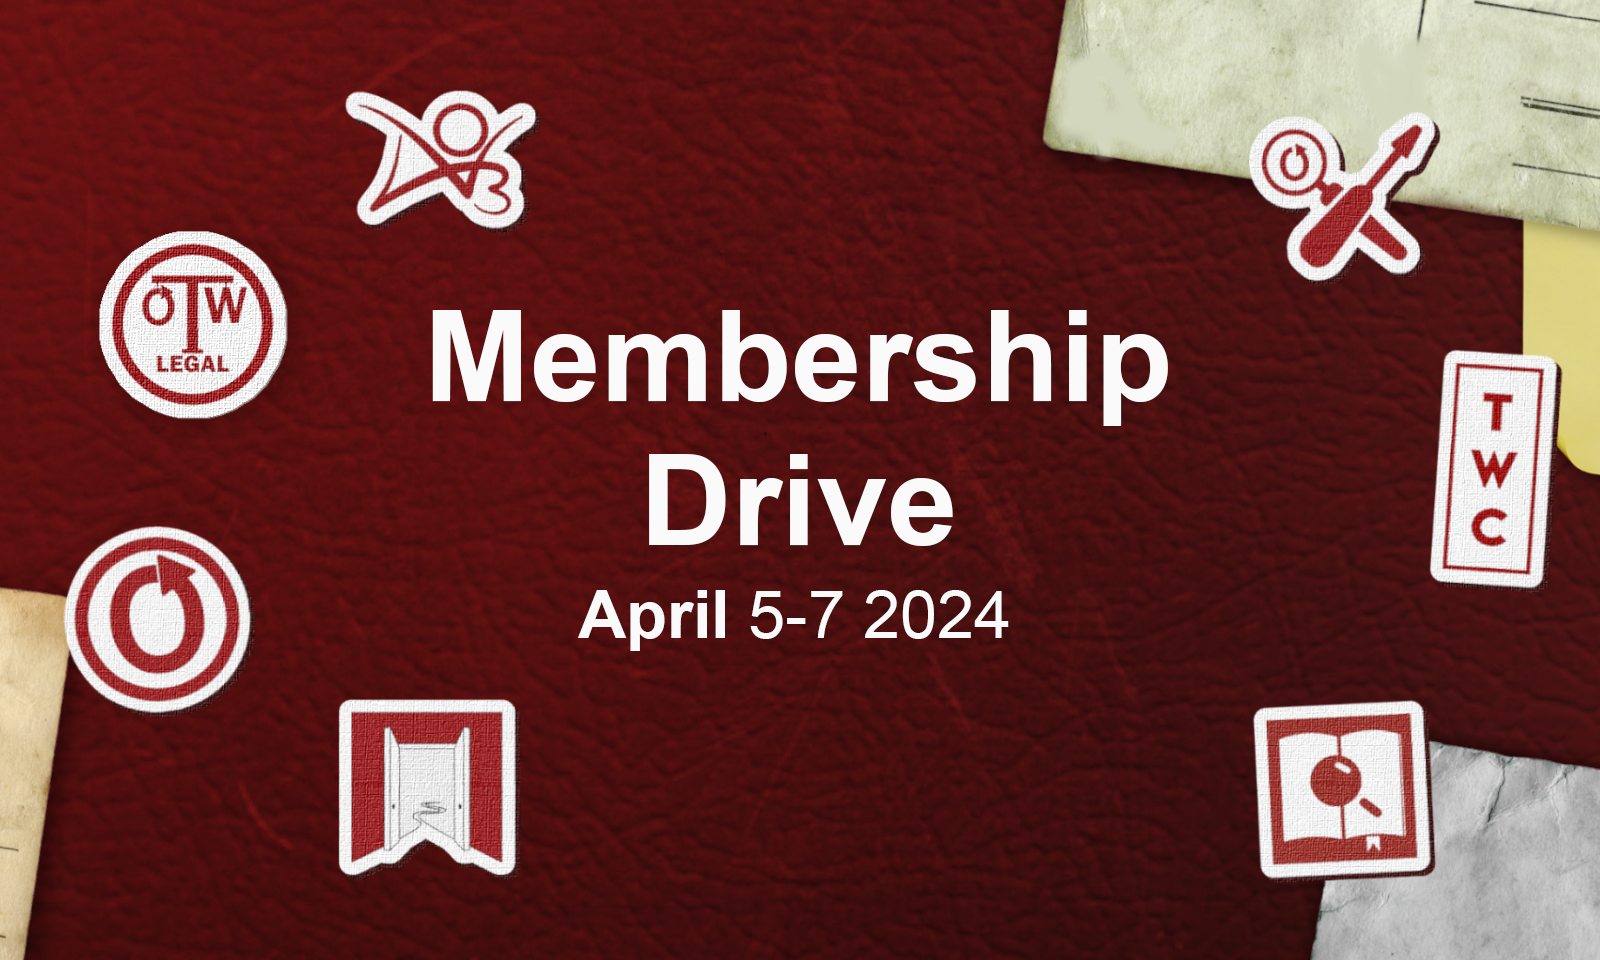 Red background with all 7 of the OTW logos scattered in a circle around the words Membership Drive, April 5-7, 2024.  The logos are for AO3,  Legal, OTW, Open Doors, Fanlore, TWC and Fanhackers